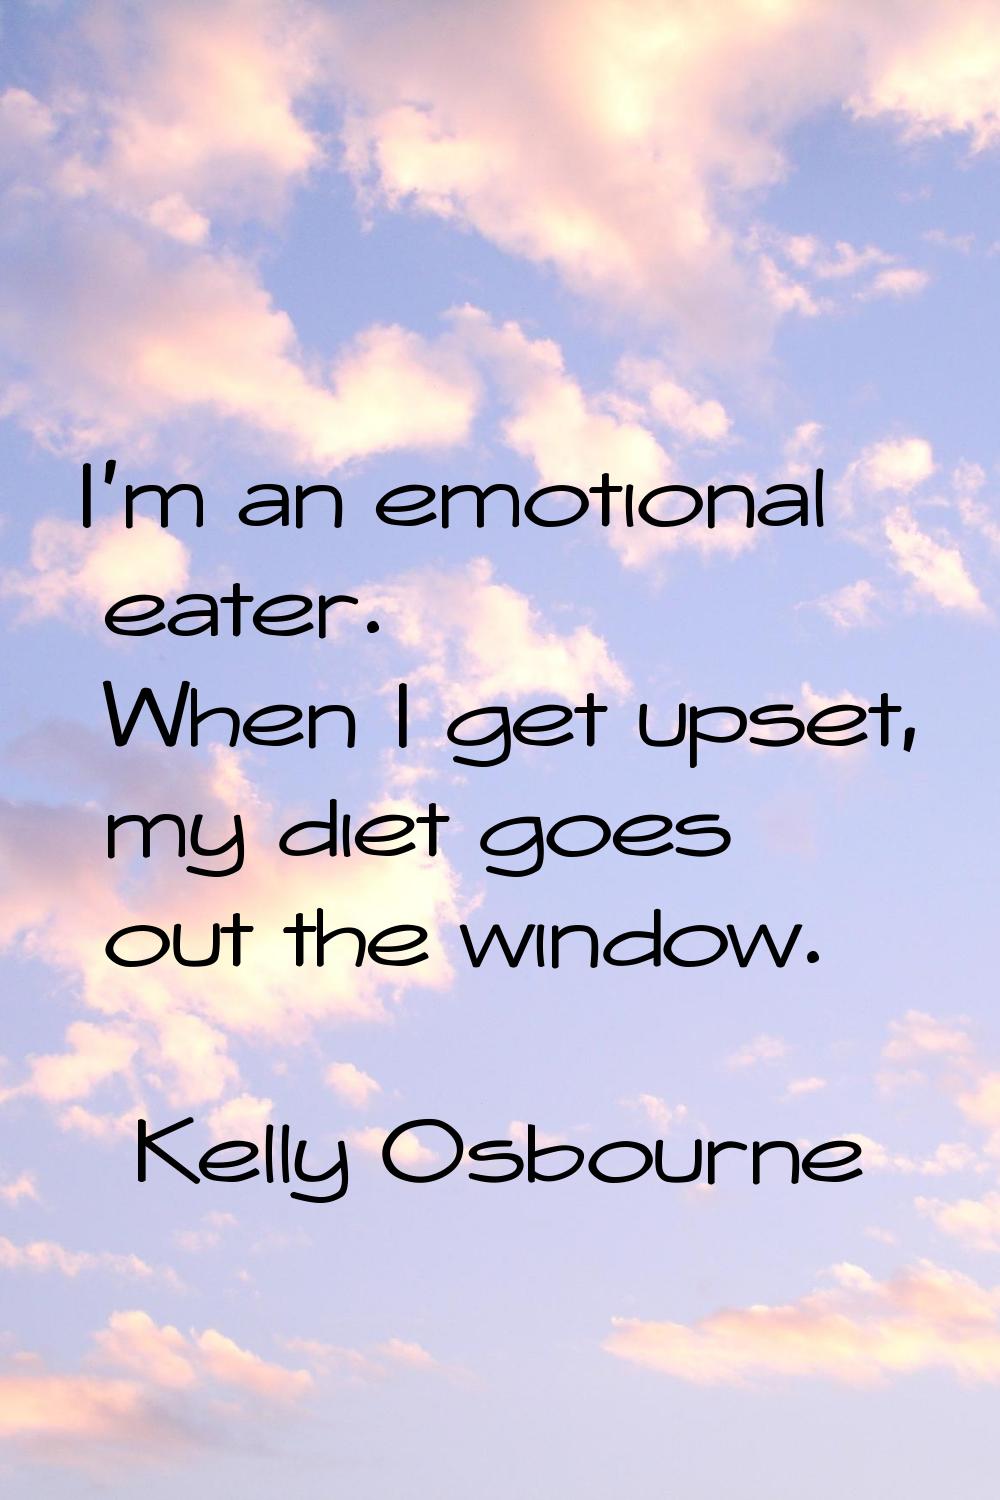 I'm an emotional eater. When I get upset, my diet goes out the window.